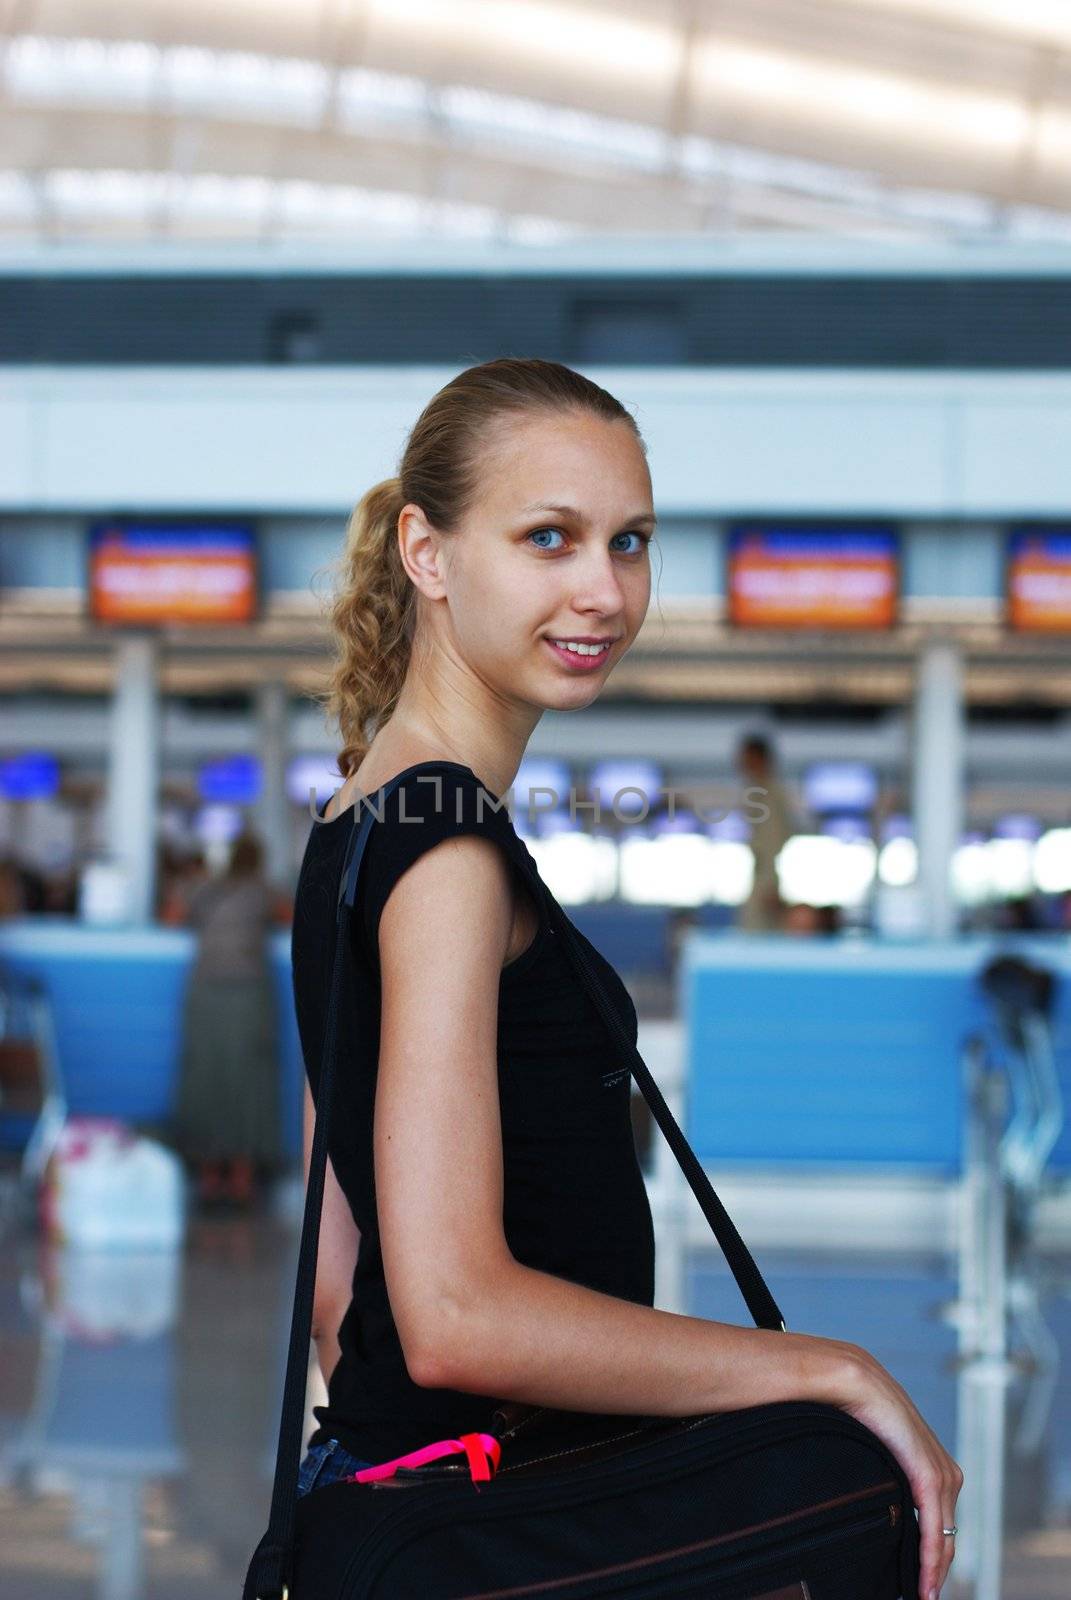 Girl in airport by haveseen